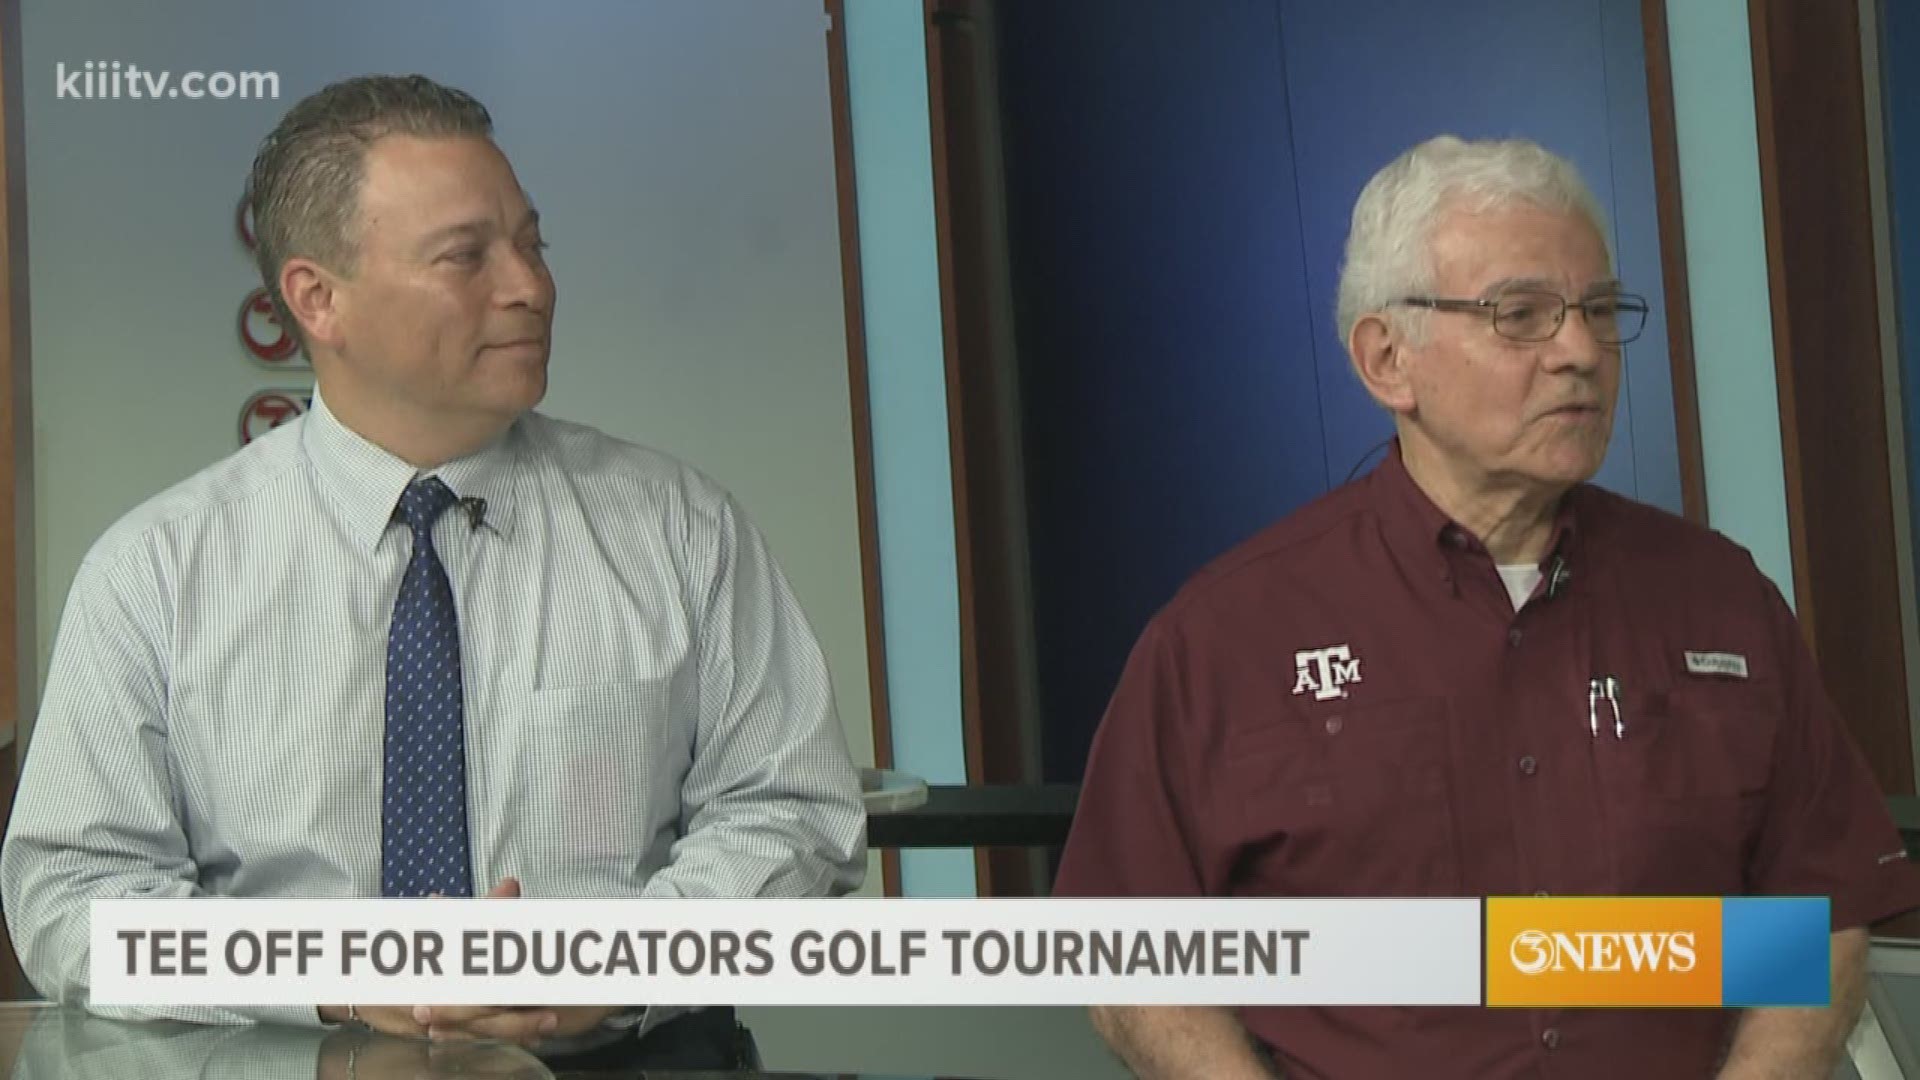 Tee off for Teachers is an inaugural golf tournament benefitting teachers in Robstown ISD.